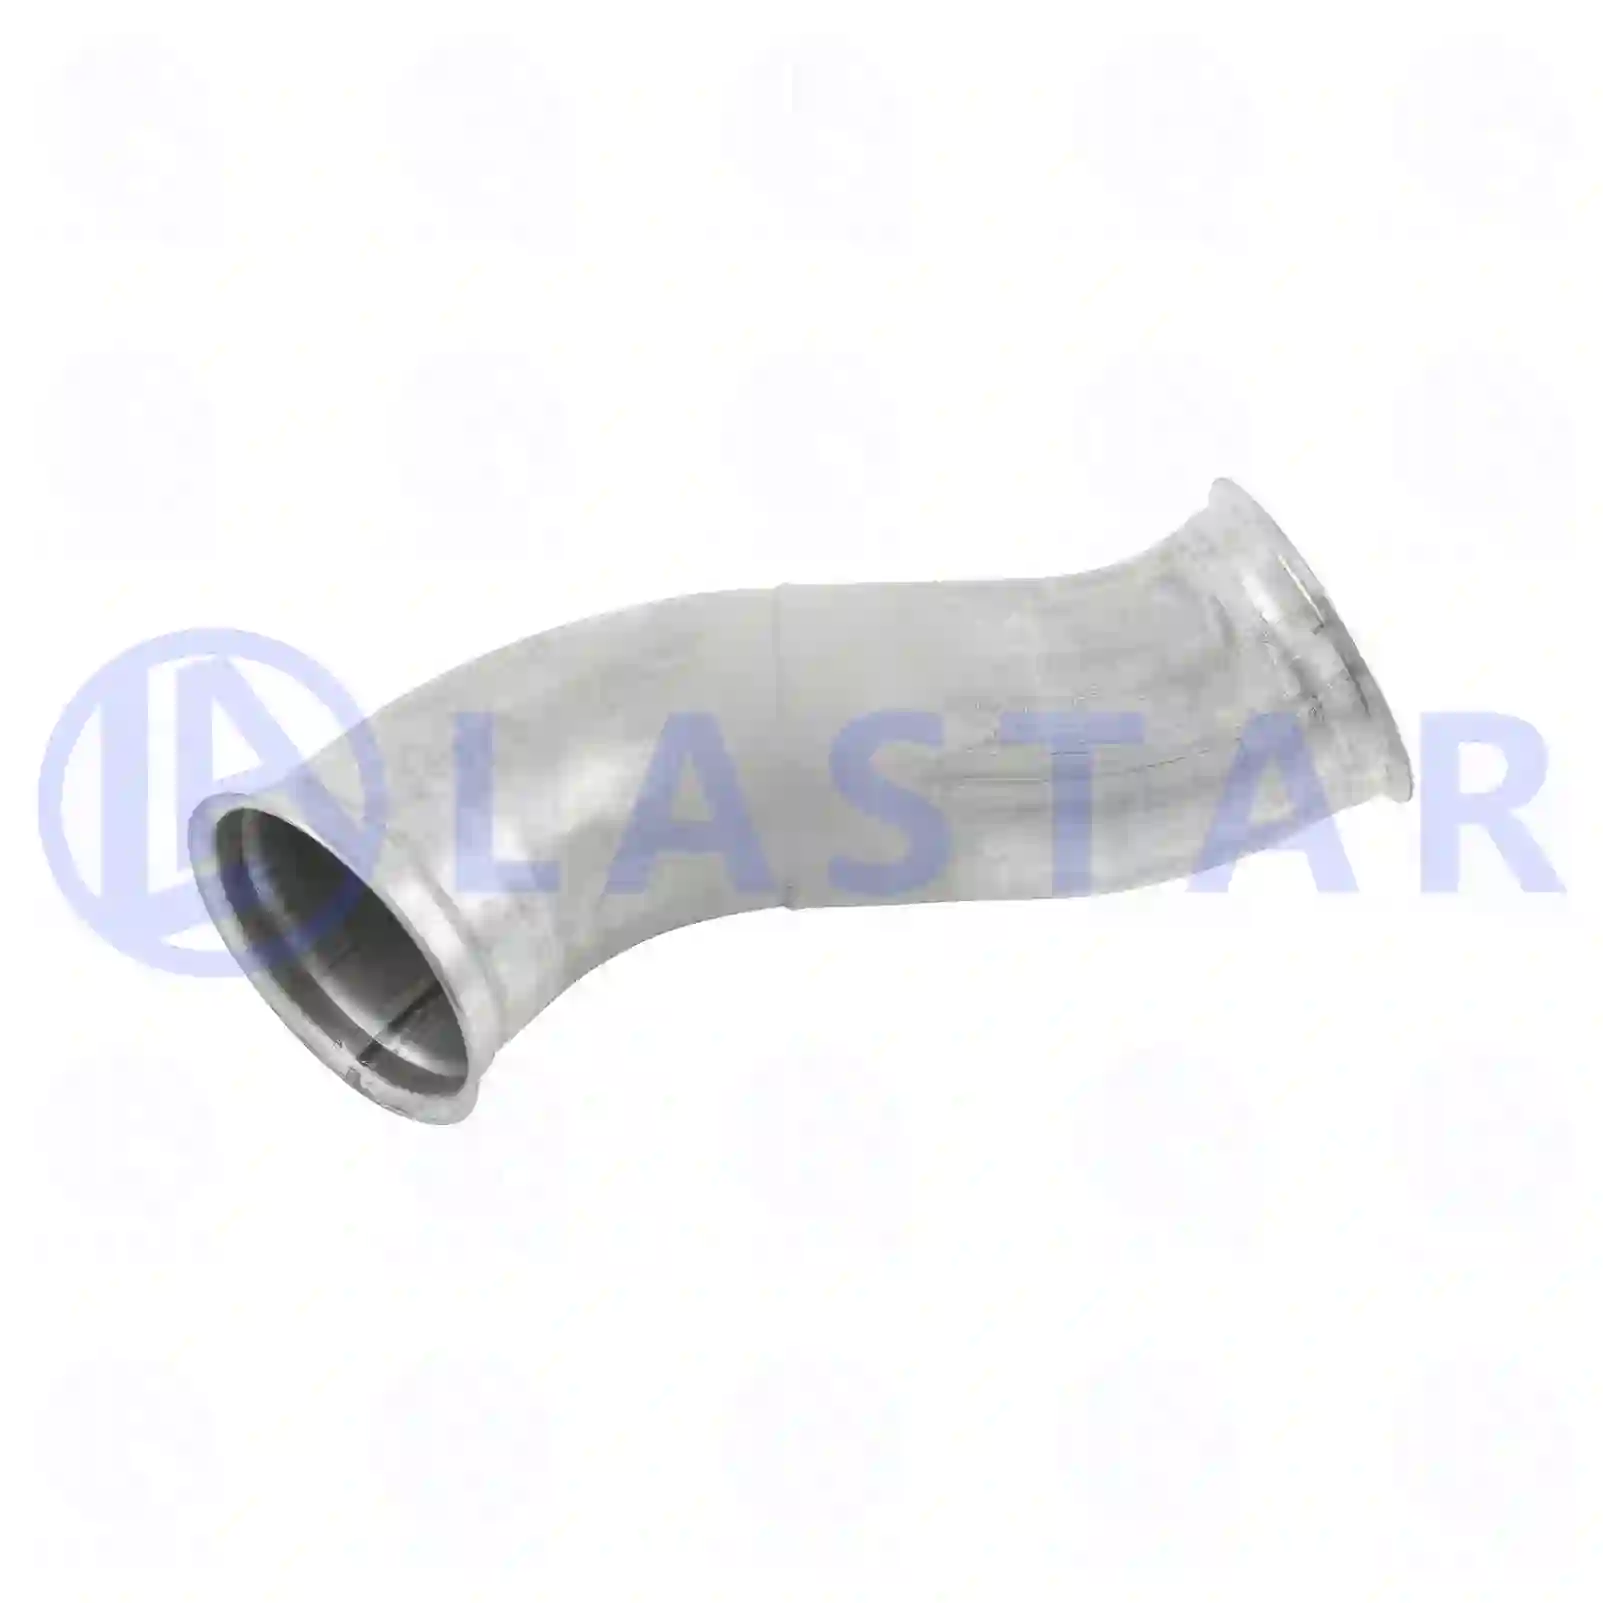 Exhaust pipe, 77706649, 7420881300, 20881300, ZG10296-0008 ||  77706649 Lastar Spare Part | Truck Spare Parts, Auotomotive Spare Parts Exhaust pipe, 77706649, 7420881300, 20881300, ZG10296-0008 ||  77706649 Lastar Spare Part | Truck Spare Parts, Auotomotive Spare Parts